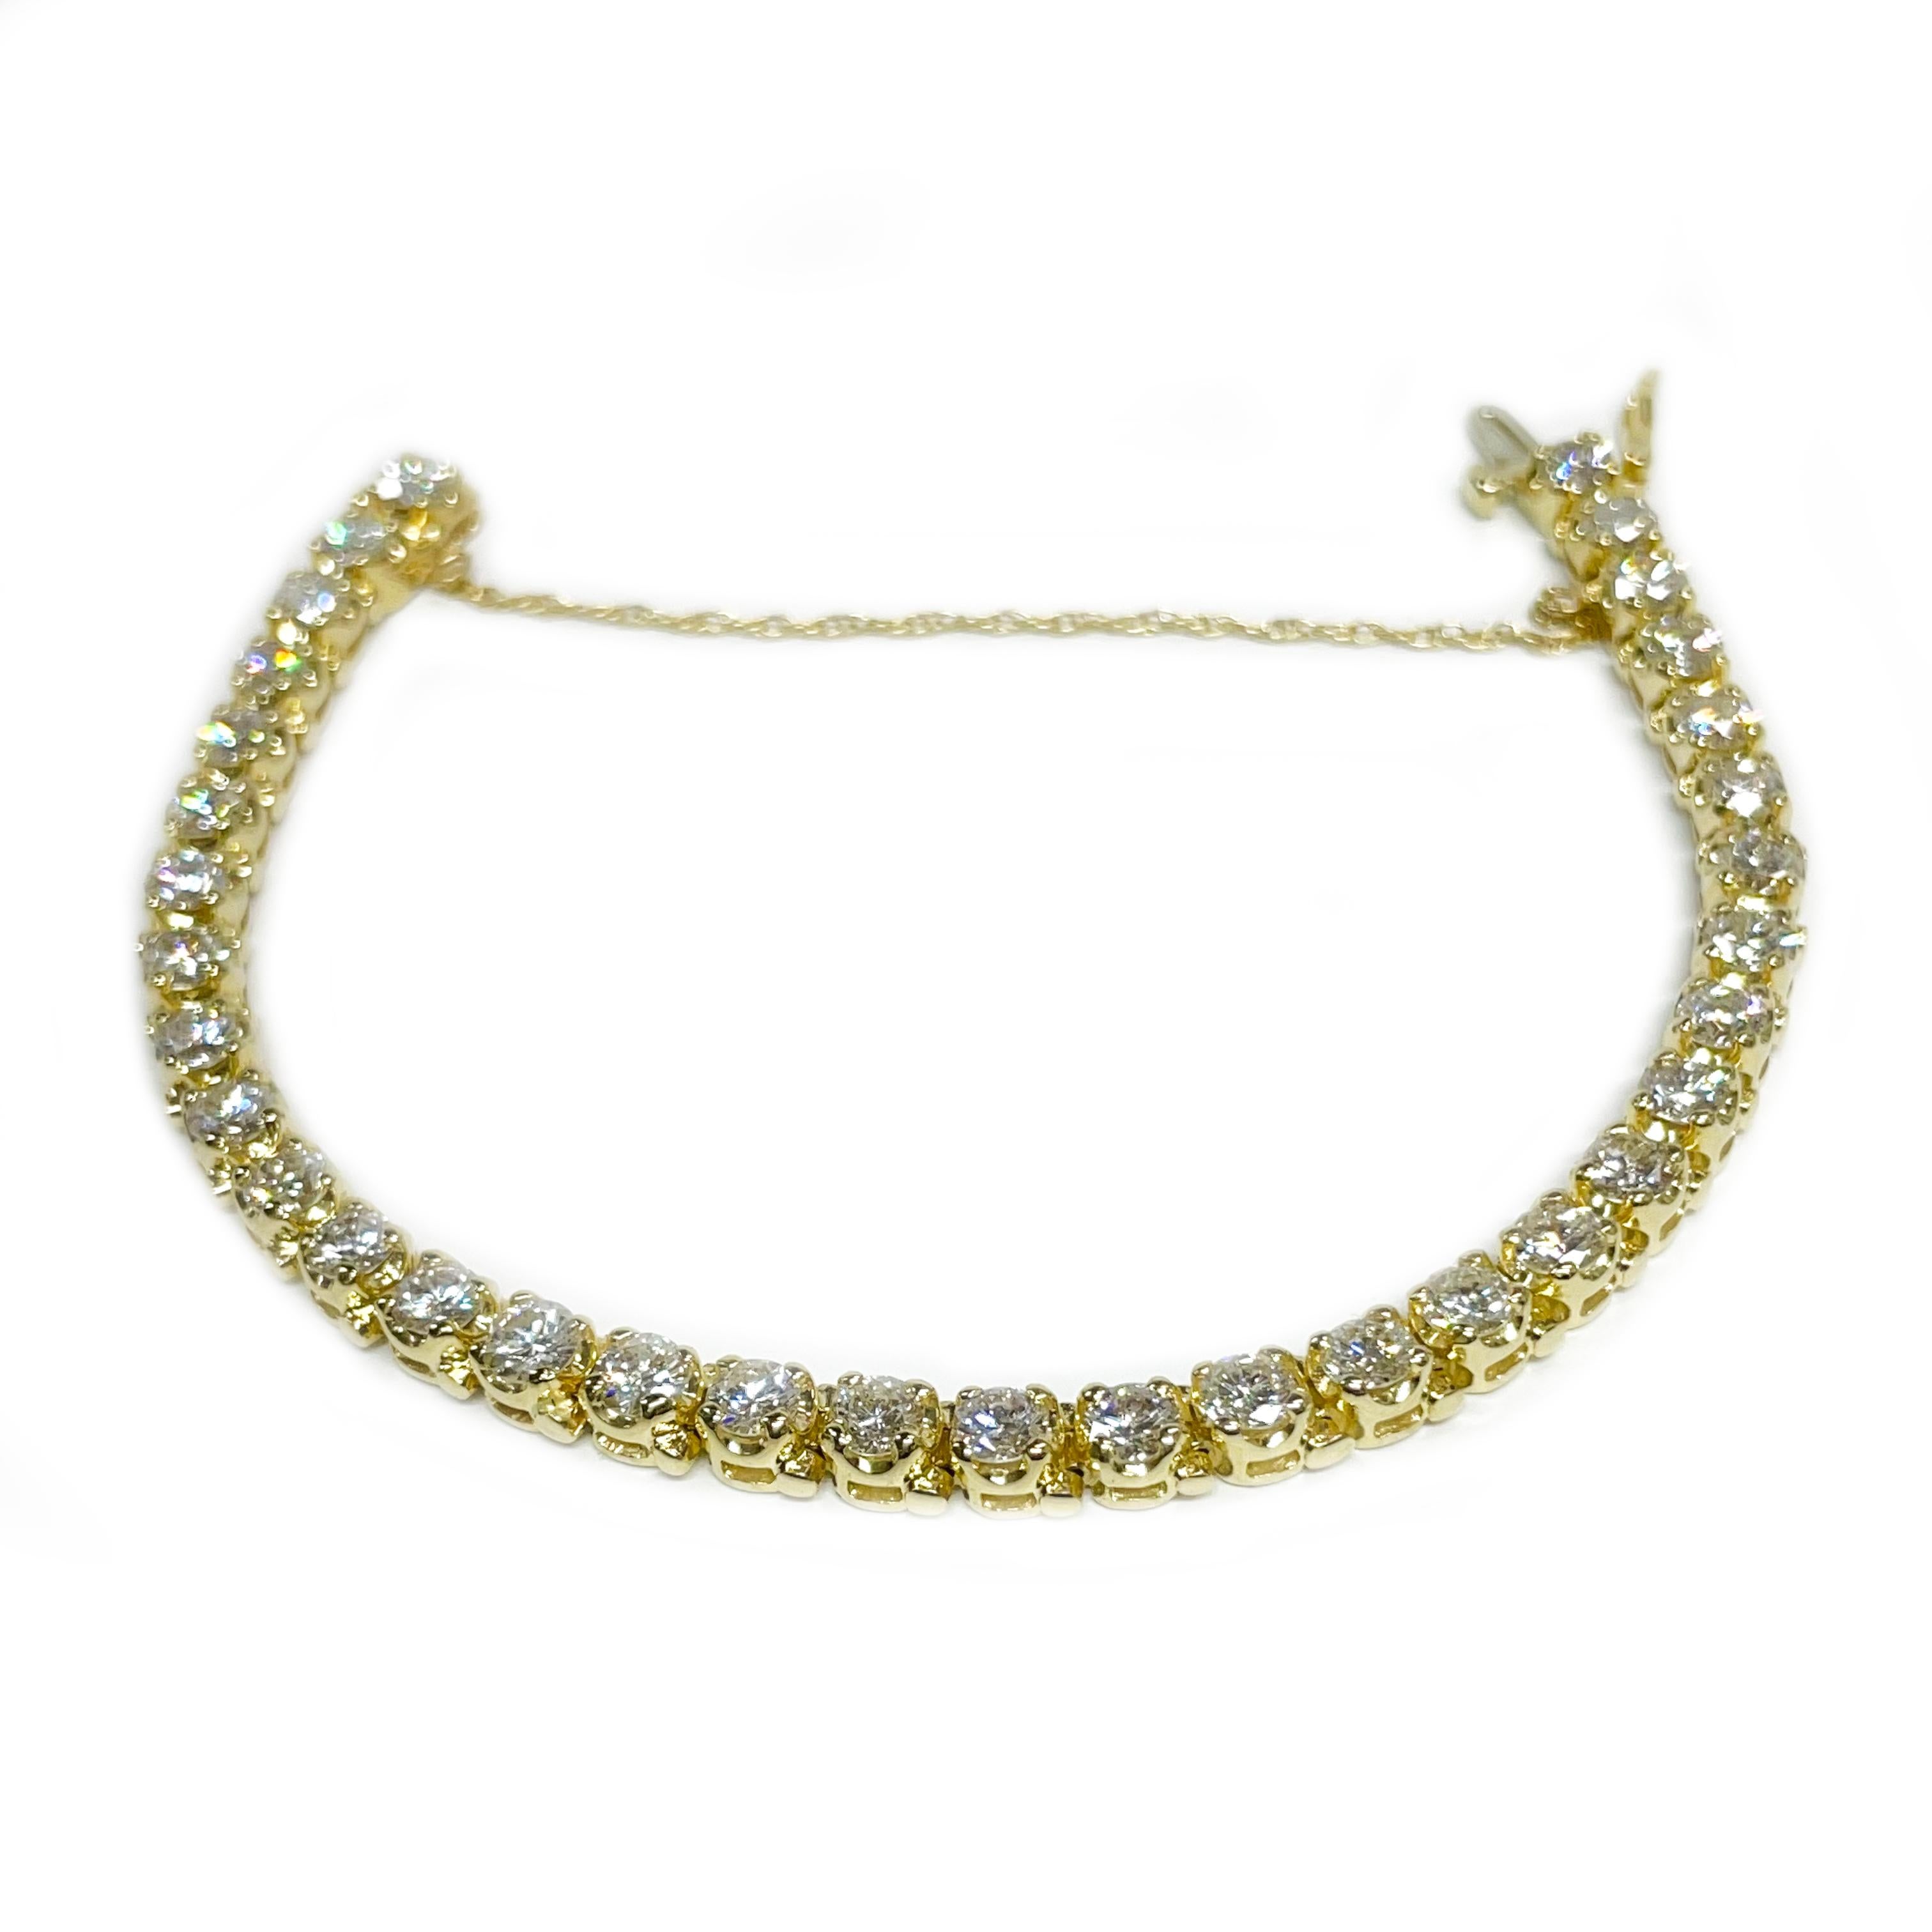 14 Karat Yellow Gold Diamond Tennis Bracelet. This gorgeous bracelet contains thirty-four round diamonds ranging from 4.0mm to 4.1mm for a total carat weight of 8.62ctw. The diamonds are VS1-VS2 in clarity (G.I.A.) and G-H in color (G.I.A.). The